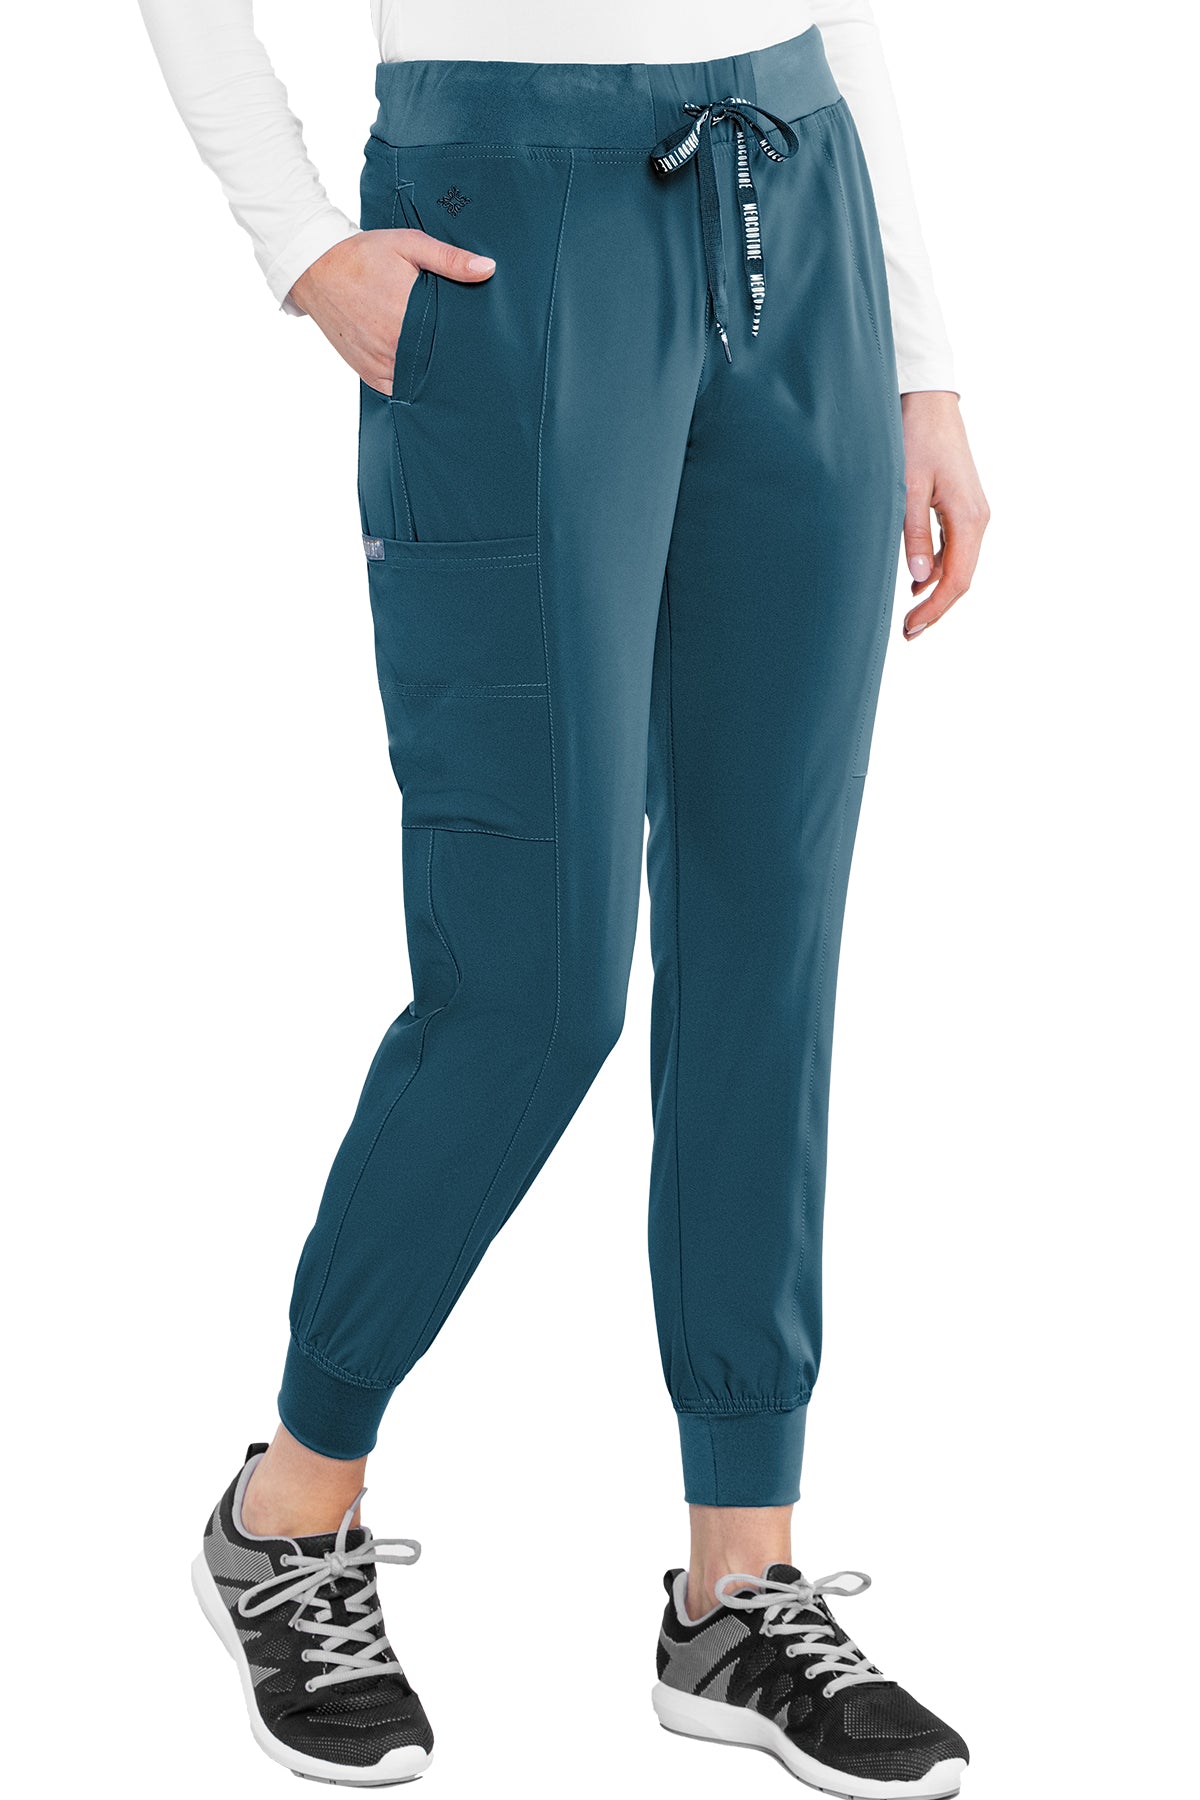 Med Couture 8721 SEAMED JOGGER